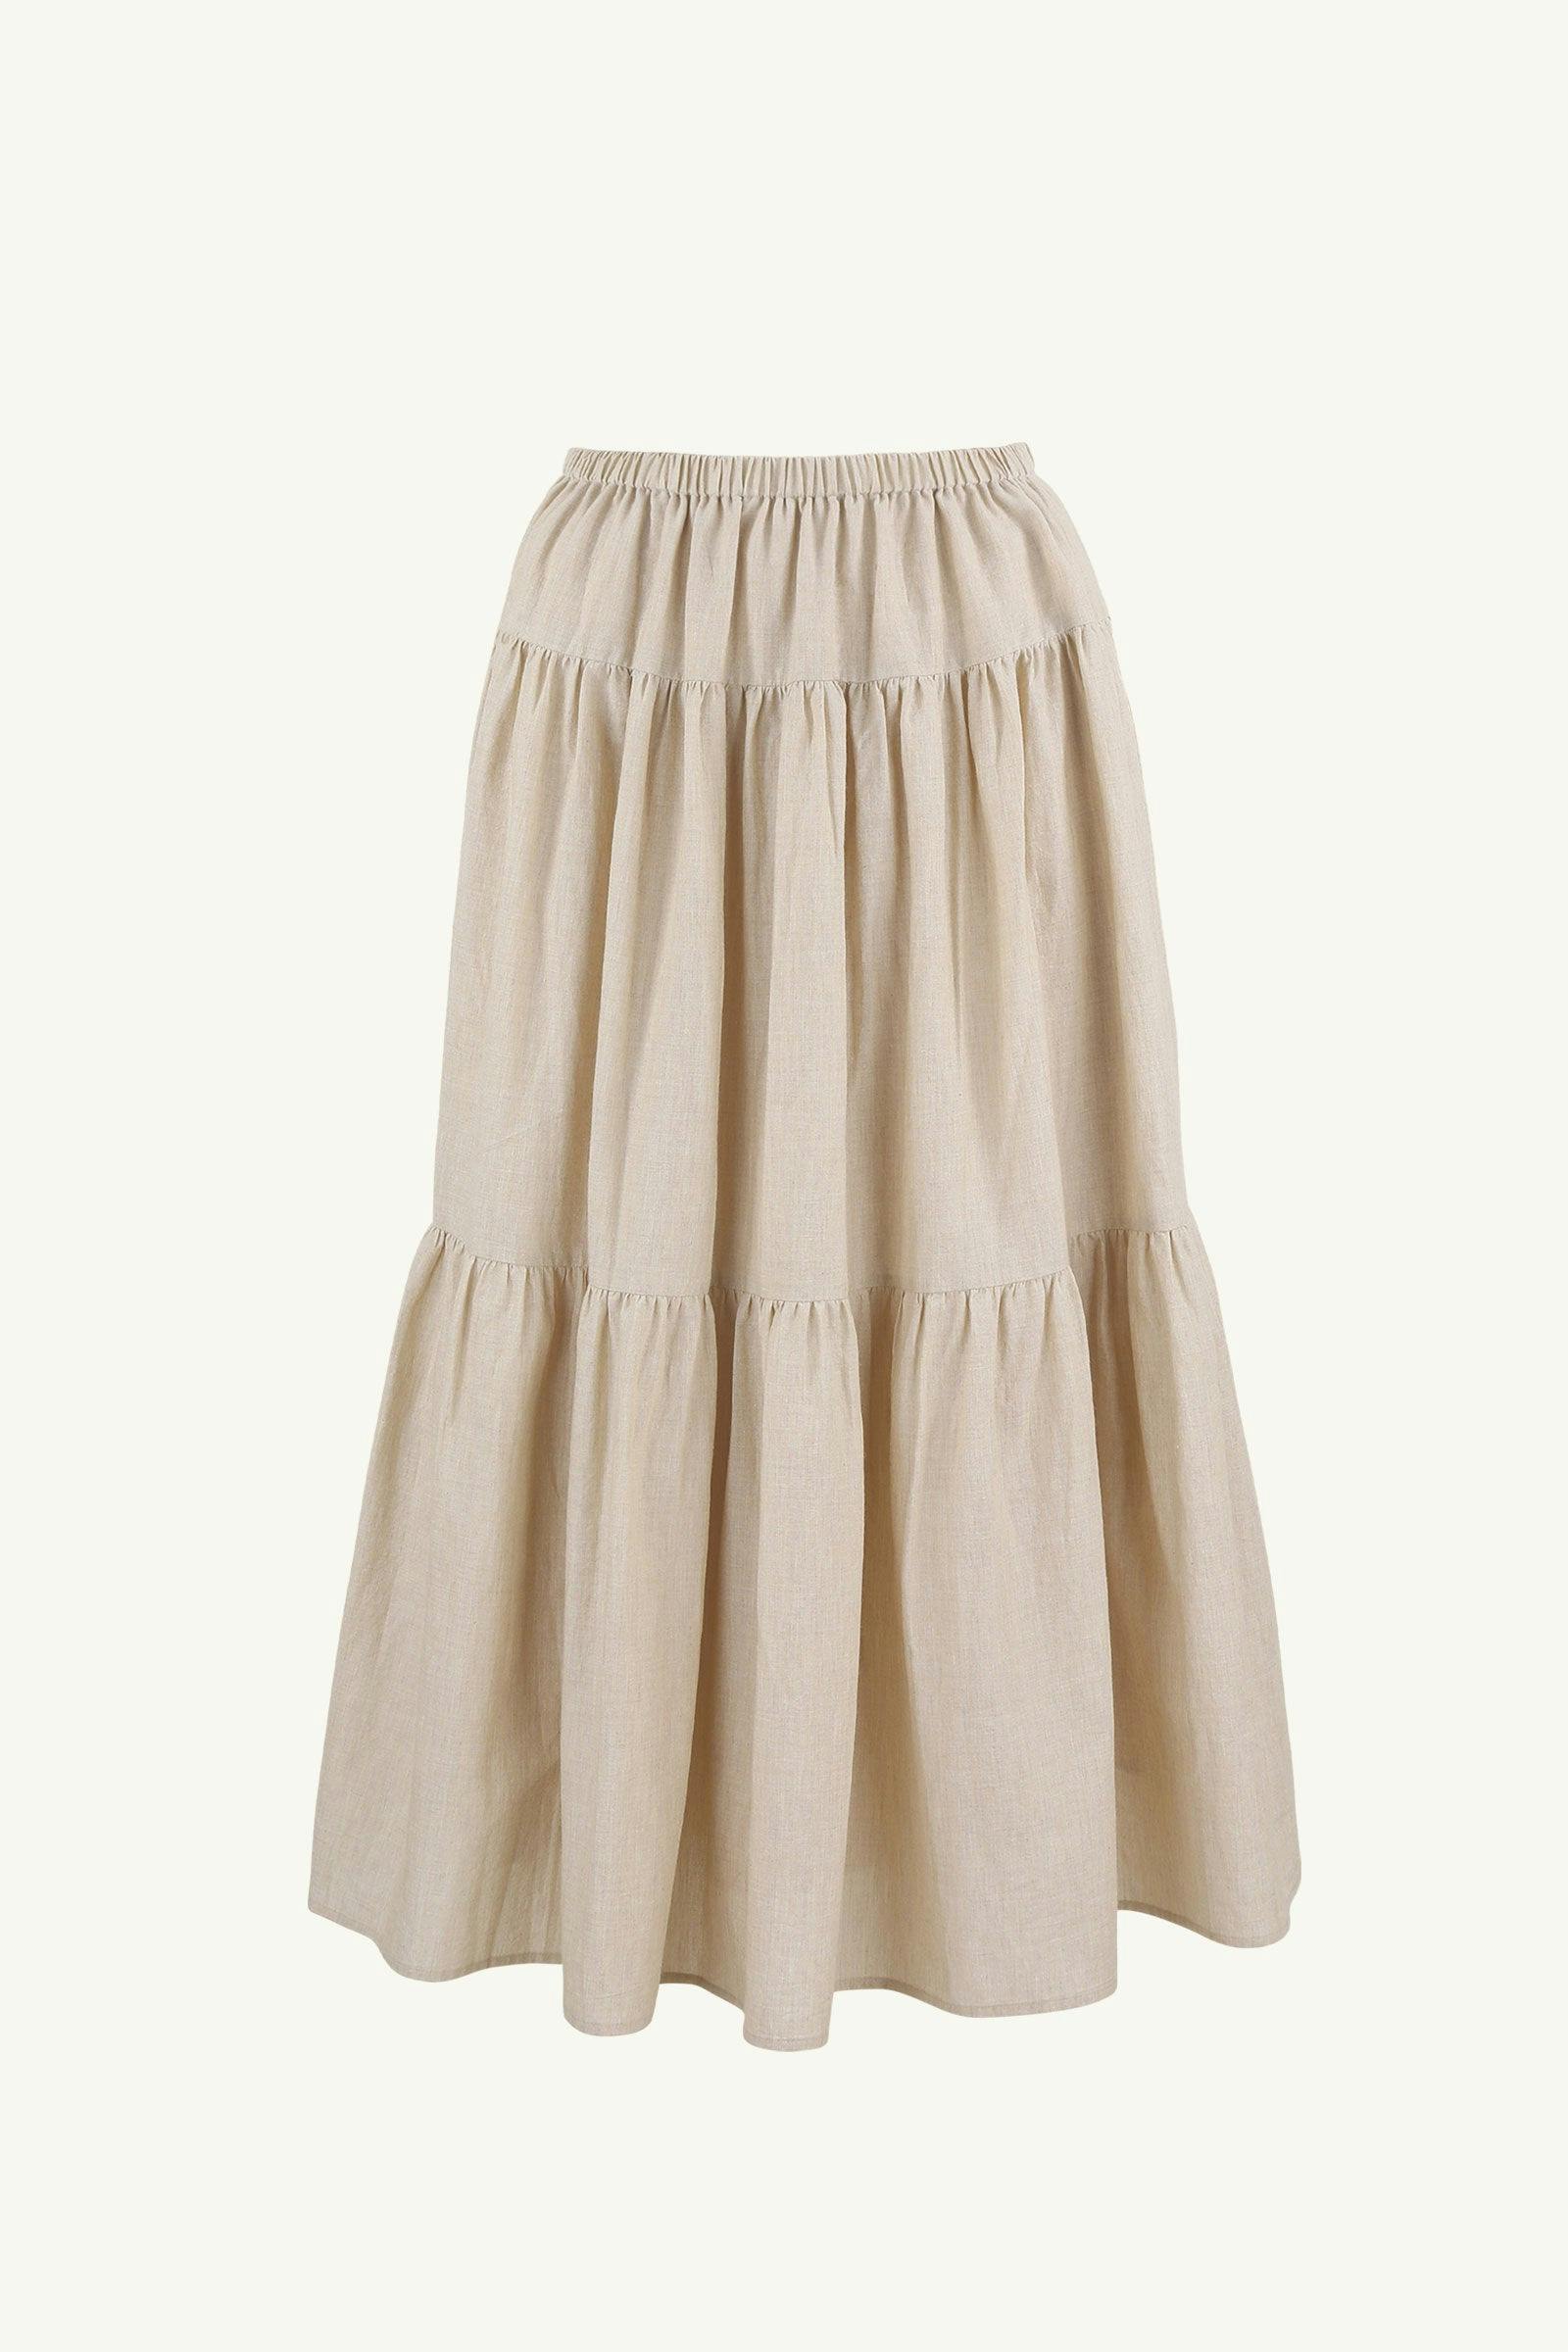 Teacake Skirt | Tiered Flare Skirt in scone Colour | Something to Hold